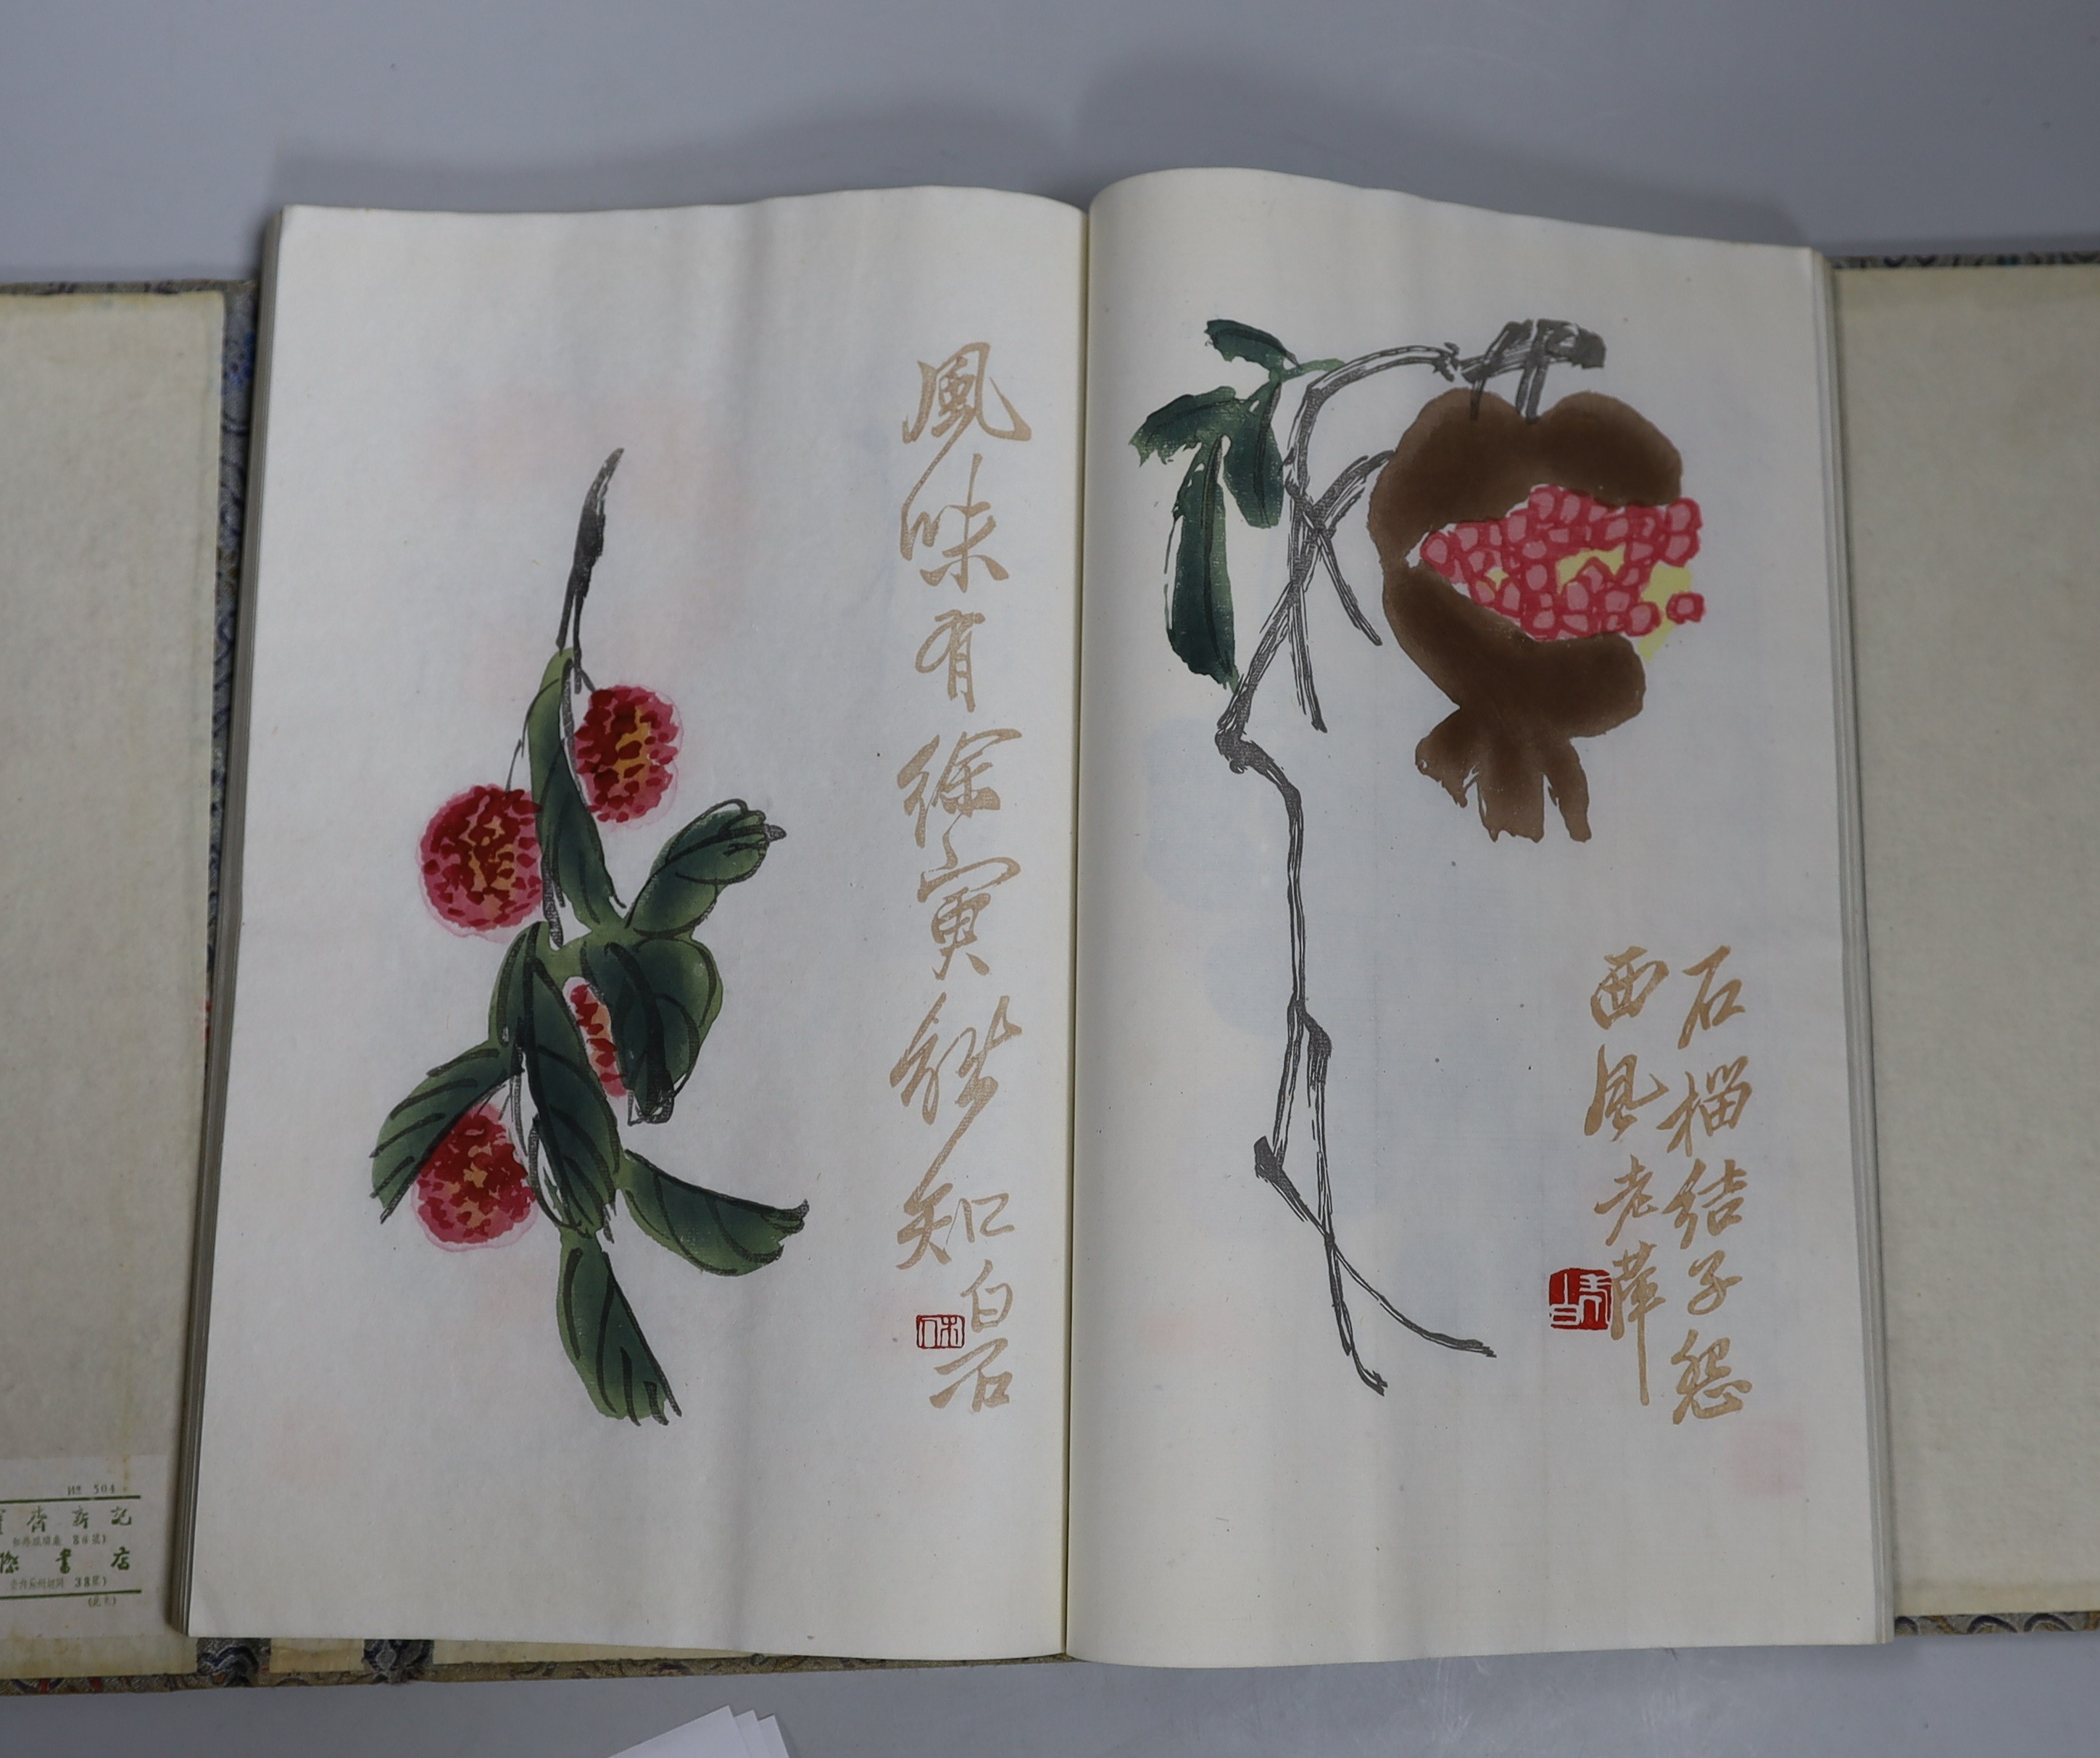 A Chinese book of woodblock prints of works by famous artists including Qi Baishi, published by Rongbao Ji, Beijing 1952